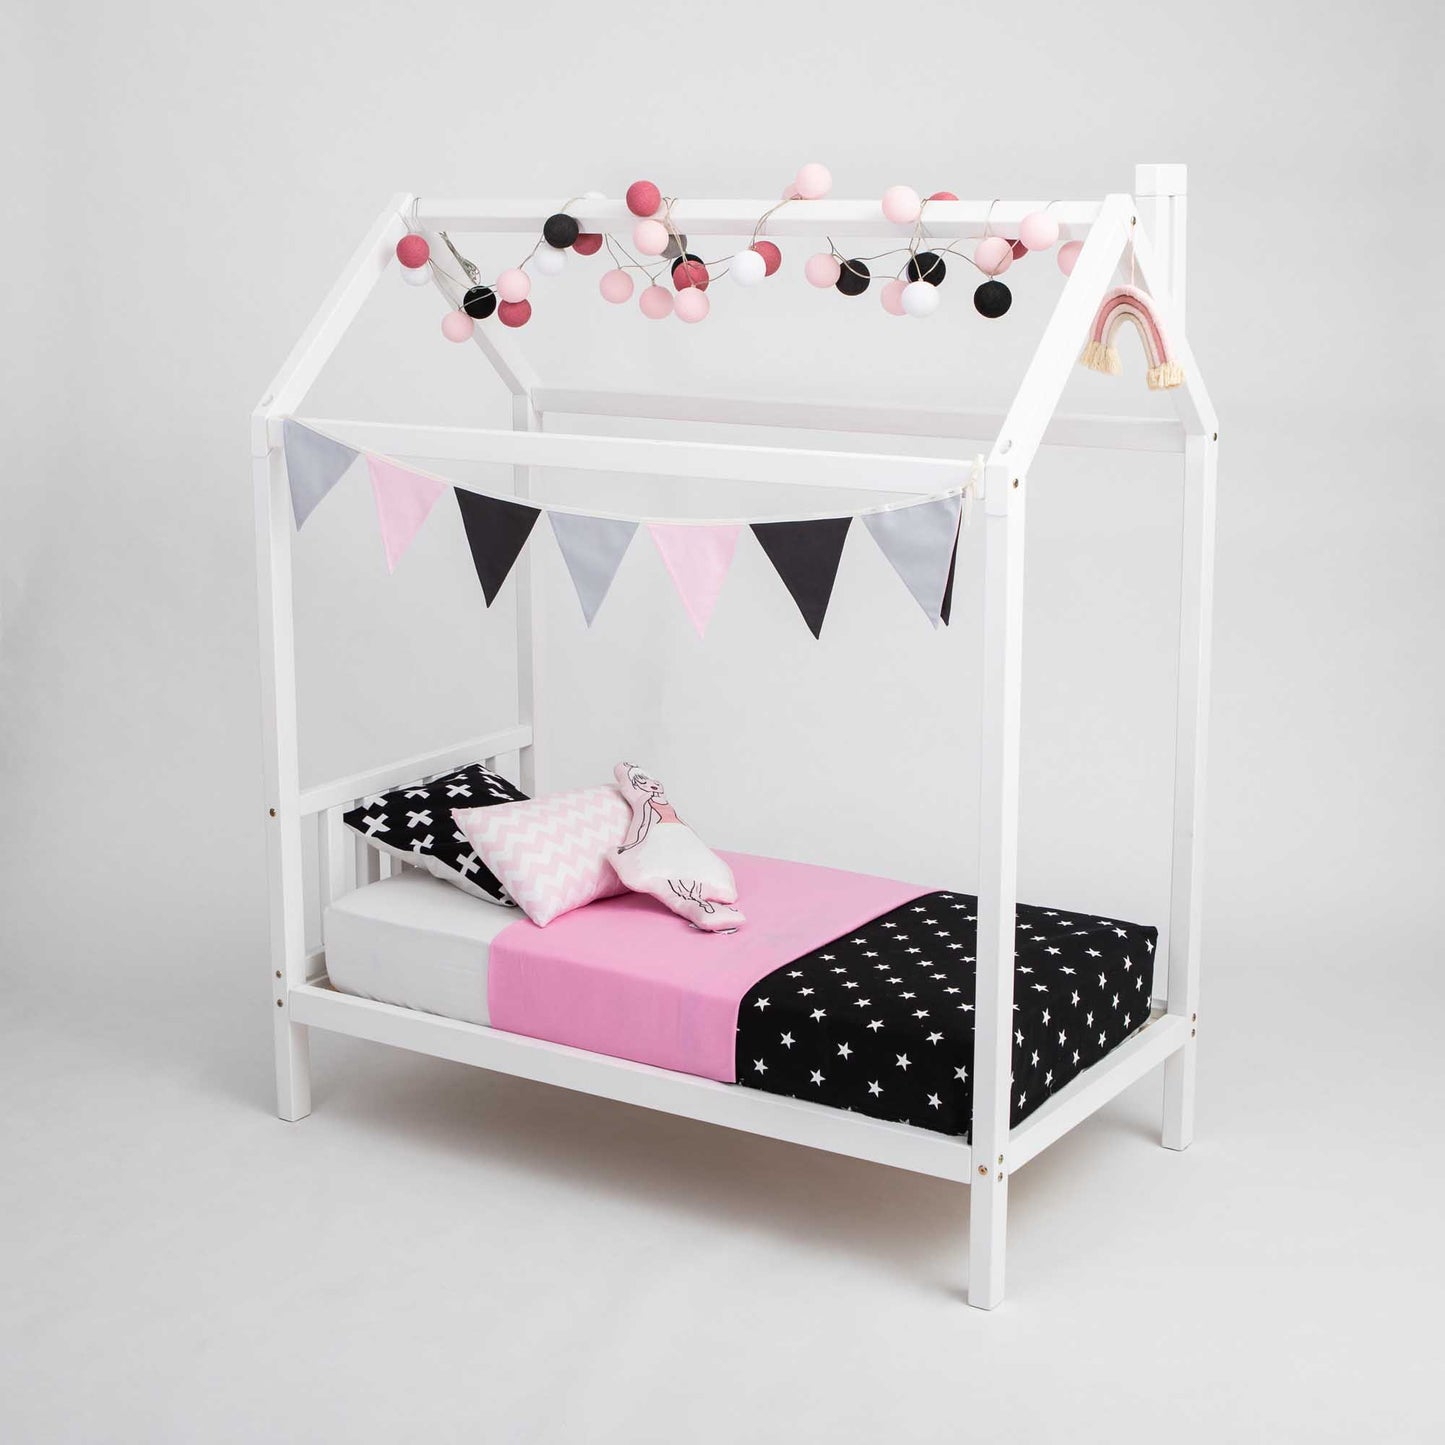 A Toddlers' house bed on legs with a headboard and a pink and black polka dot canopy and bunting.